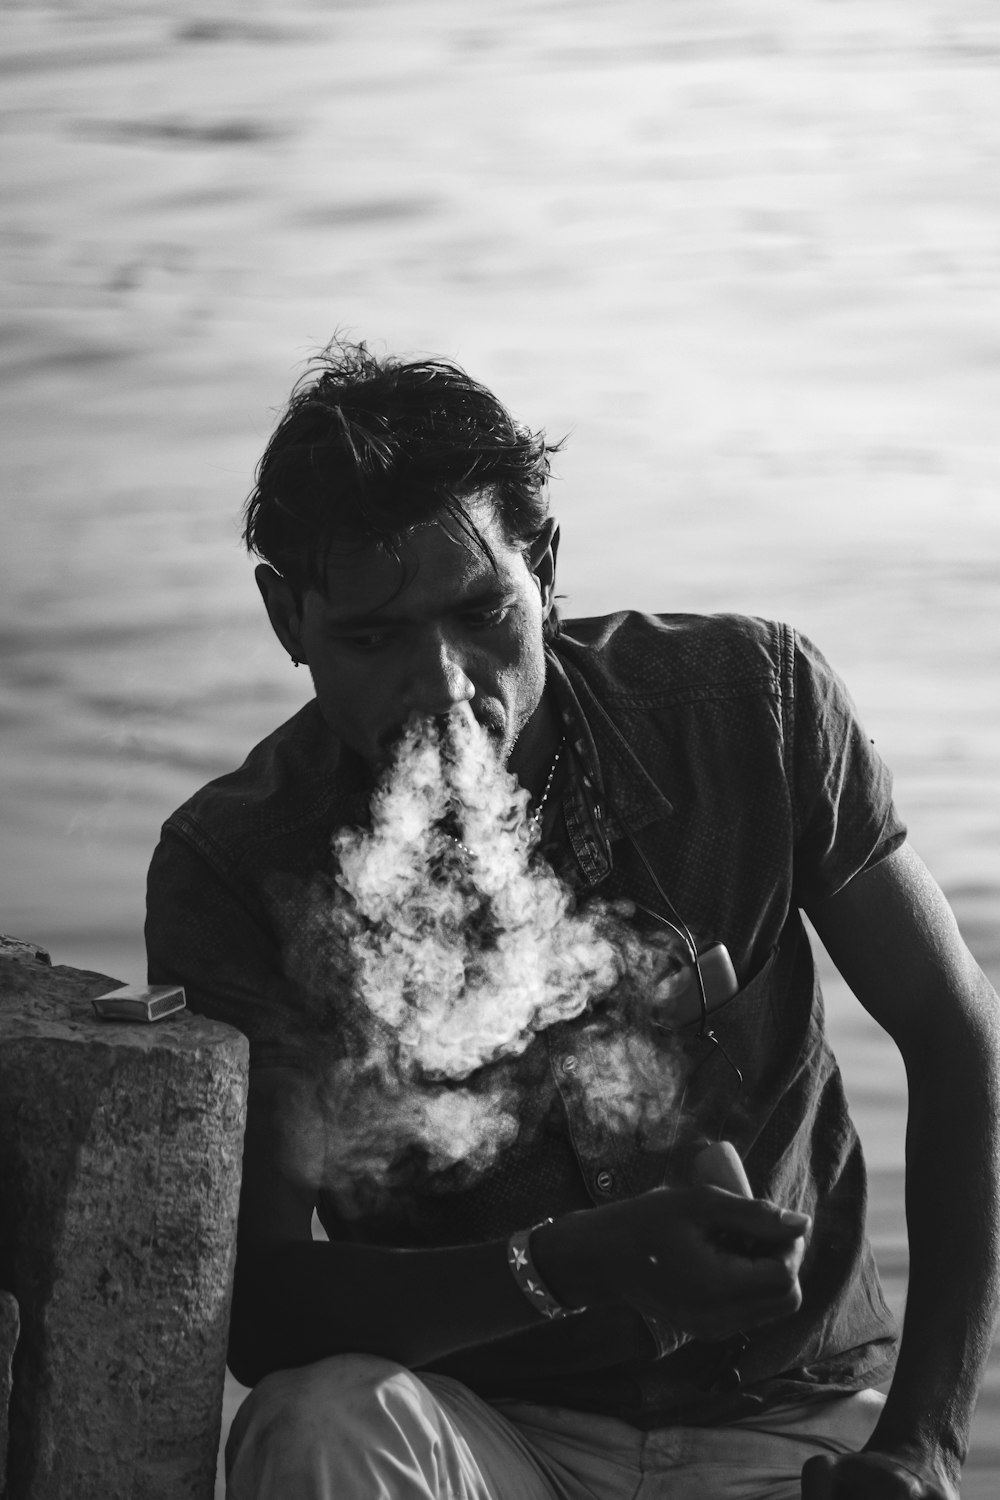 grayscale photo of man in black t-shirt smoking cigarette